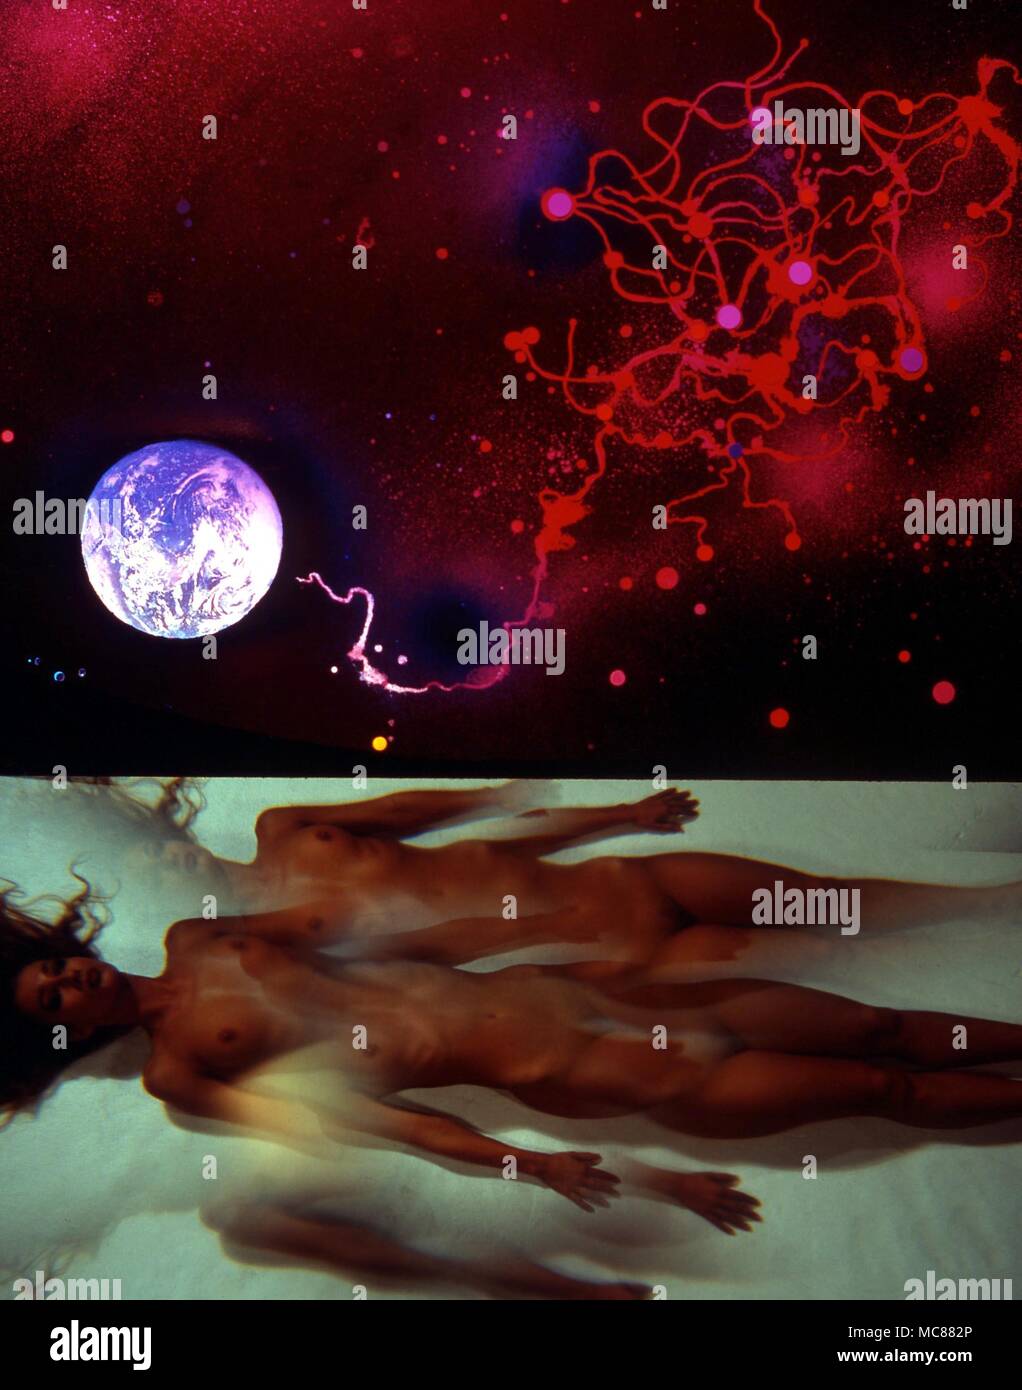 Dislocated astral body floating in dramatic cosmic setting. Stock Photo